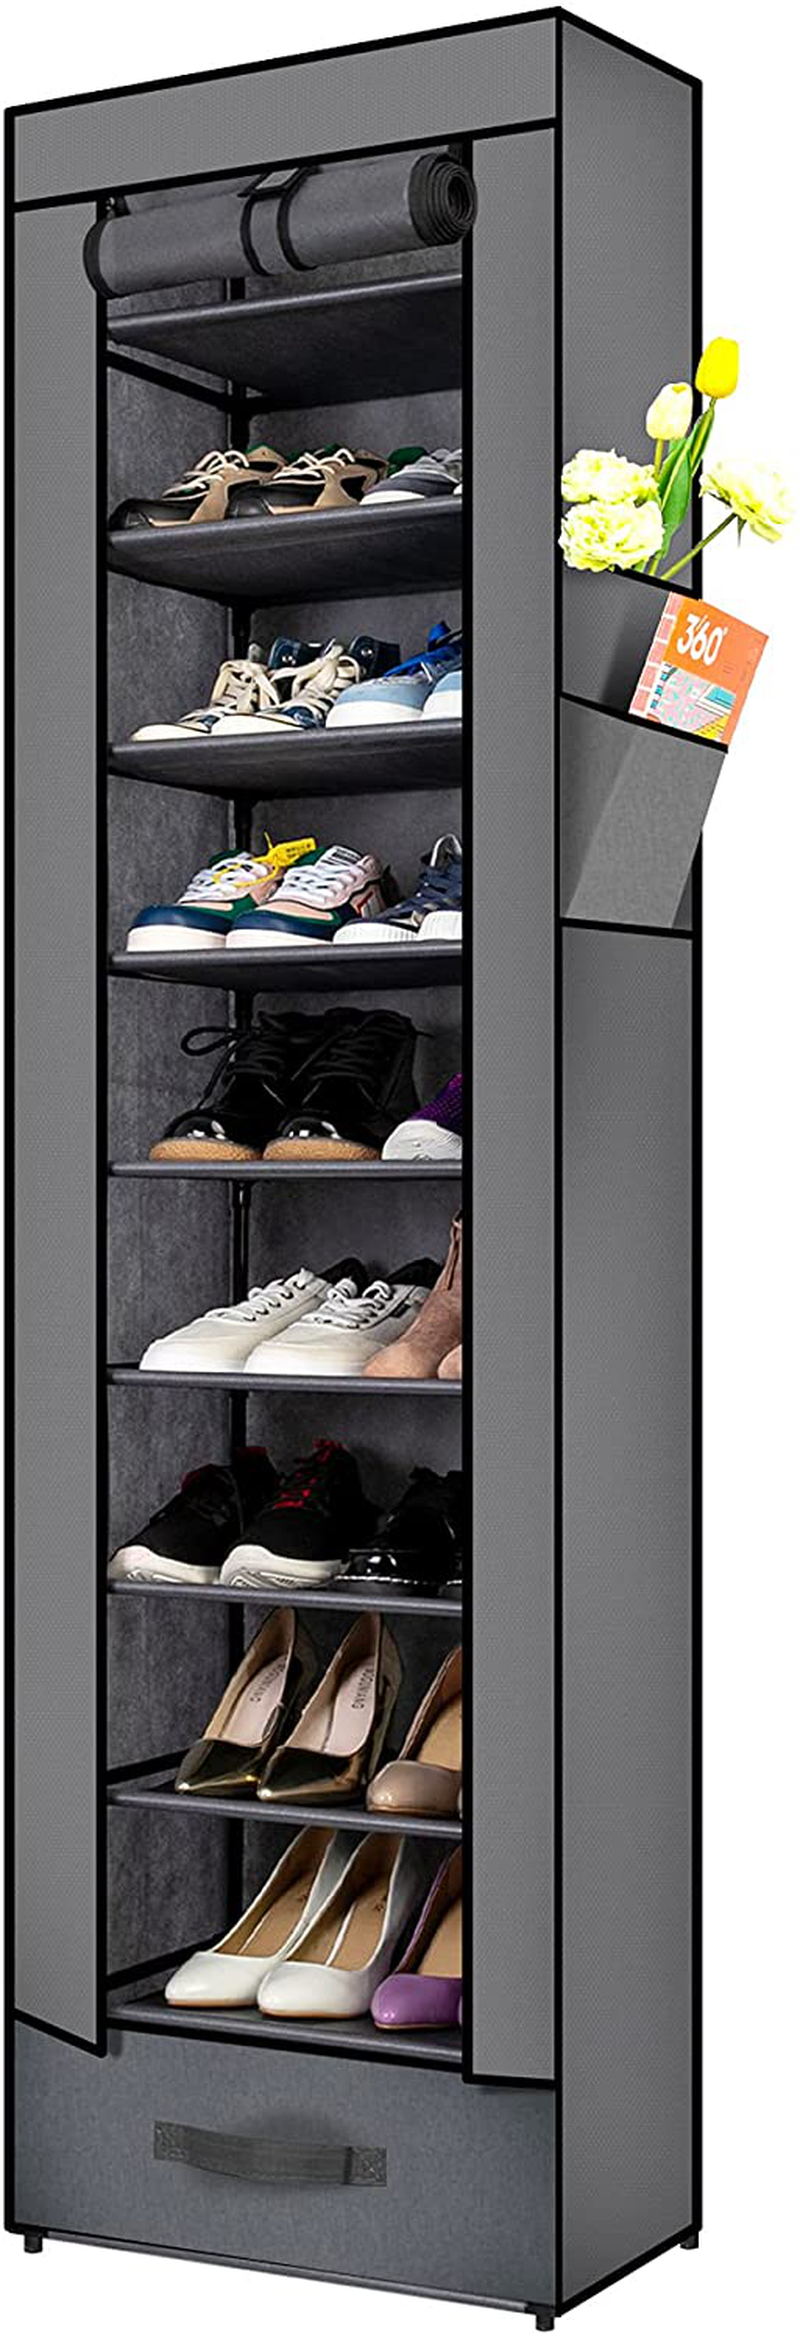 Shoes Rack,10 Tier Tall Shoe Rack - Narrow Shoe Rack with Storage Box,Fabric Covered Shoe Rack,Metal Shoe Rack Organizer,Shoe Racks for Closets,Stackable Shoe Rack,Shoe Stand,Shoe Shelf Storage(Black) Furniture > Cabinets & Storage > Armoires & Wardrobes OYREL Grey  